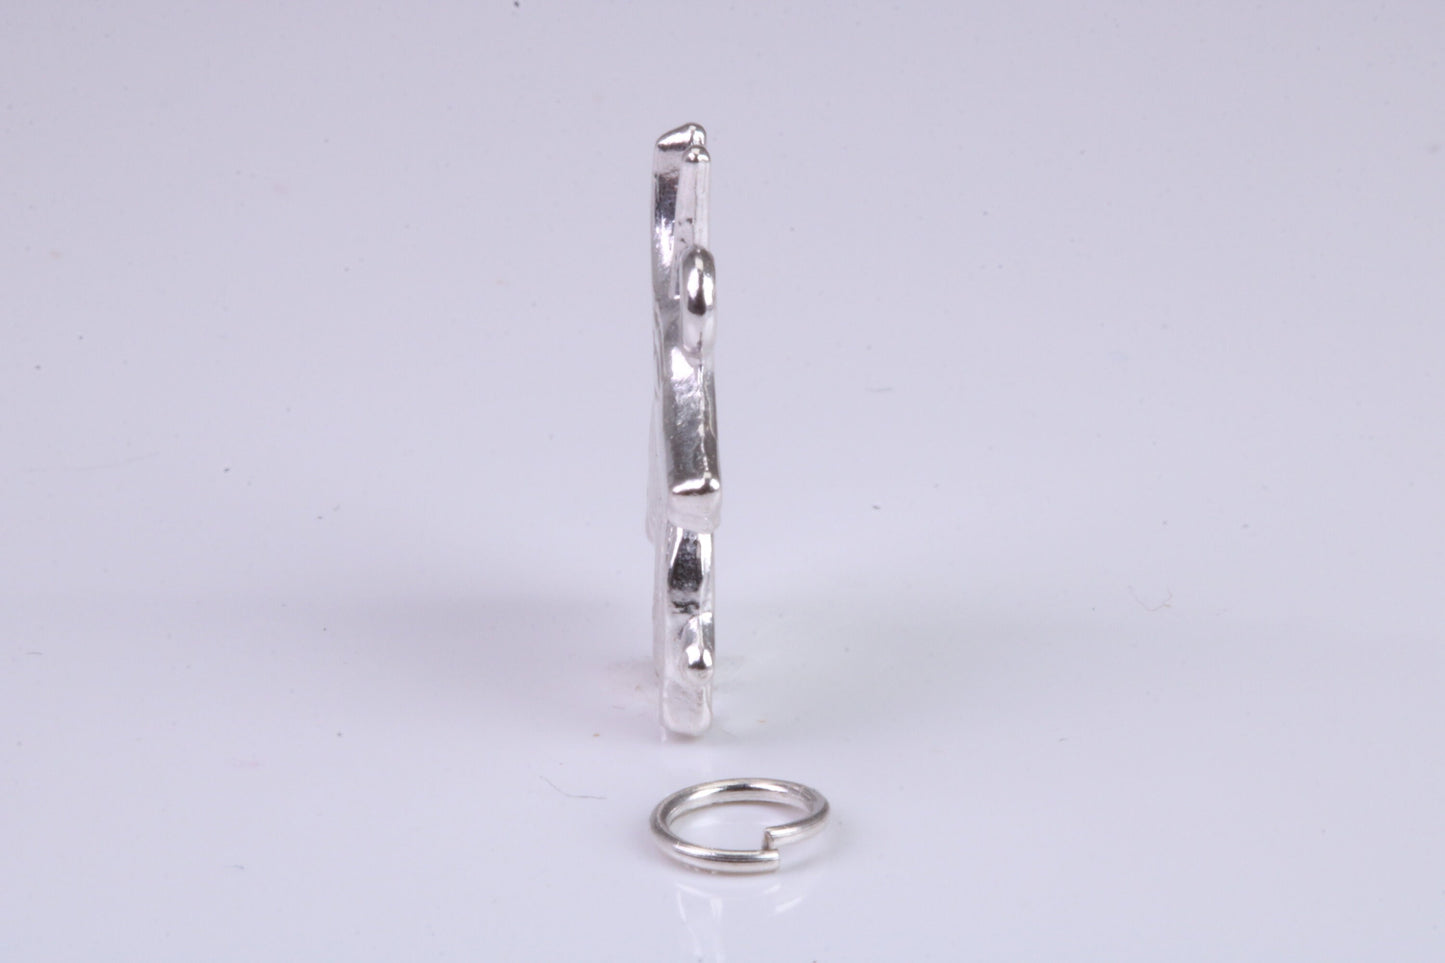 Egyptian Horus Charm, Traditional Charm, Made from Solid 925 Grade Sterling Silver, Complete with Attachment Link